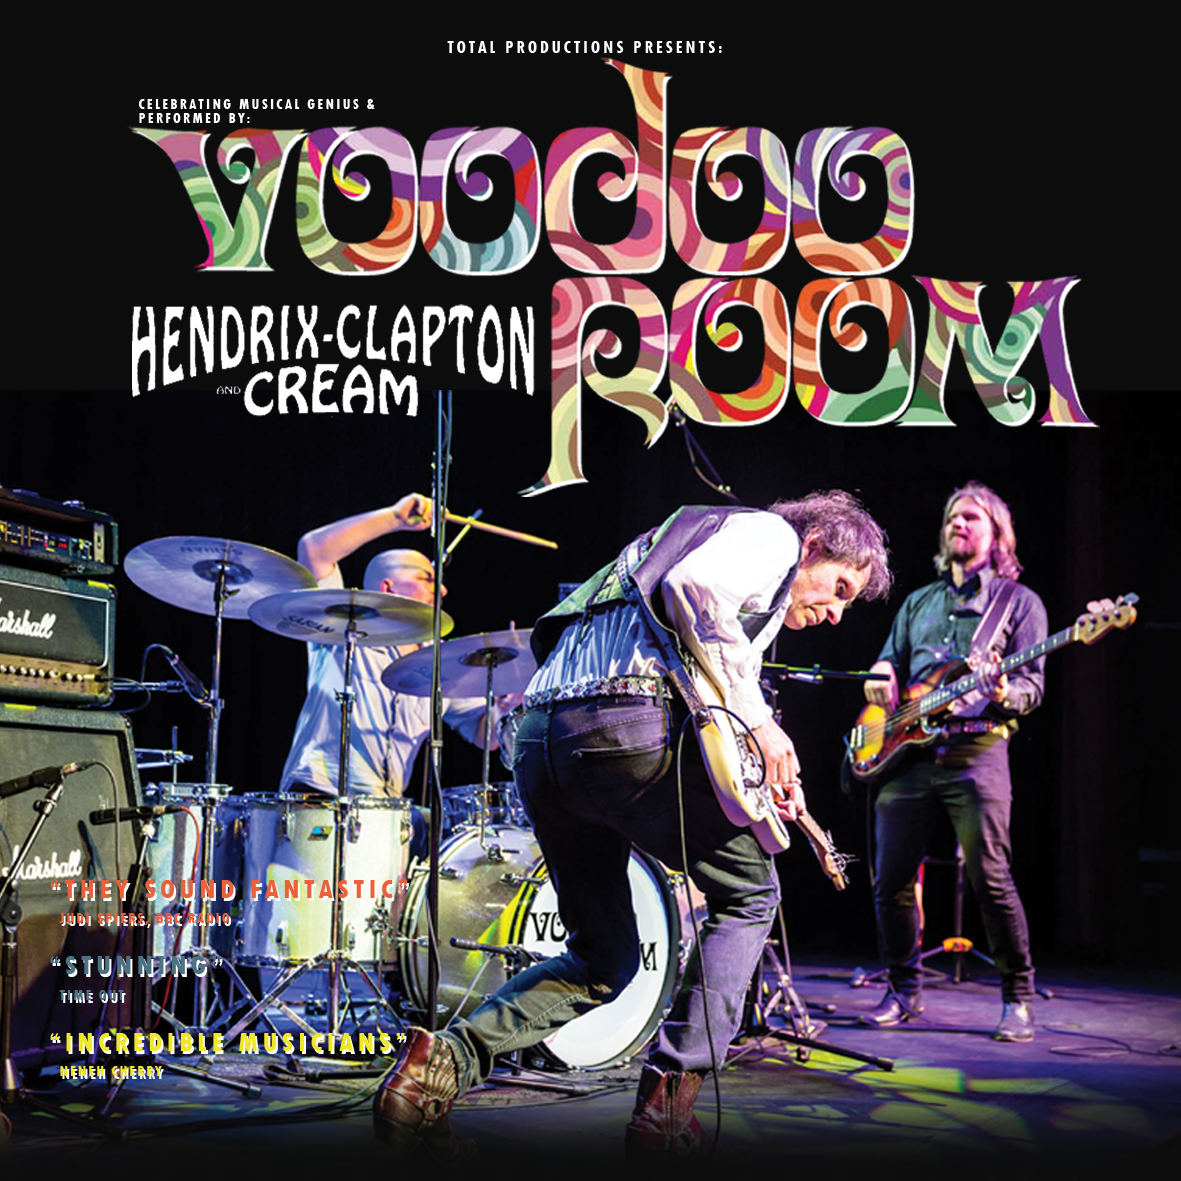 Voodoo Lounge - A Tribute to Hendrix, Clapton and Cream , Palace Theatre Paignton